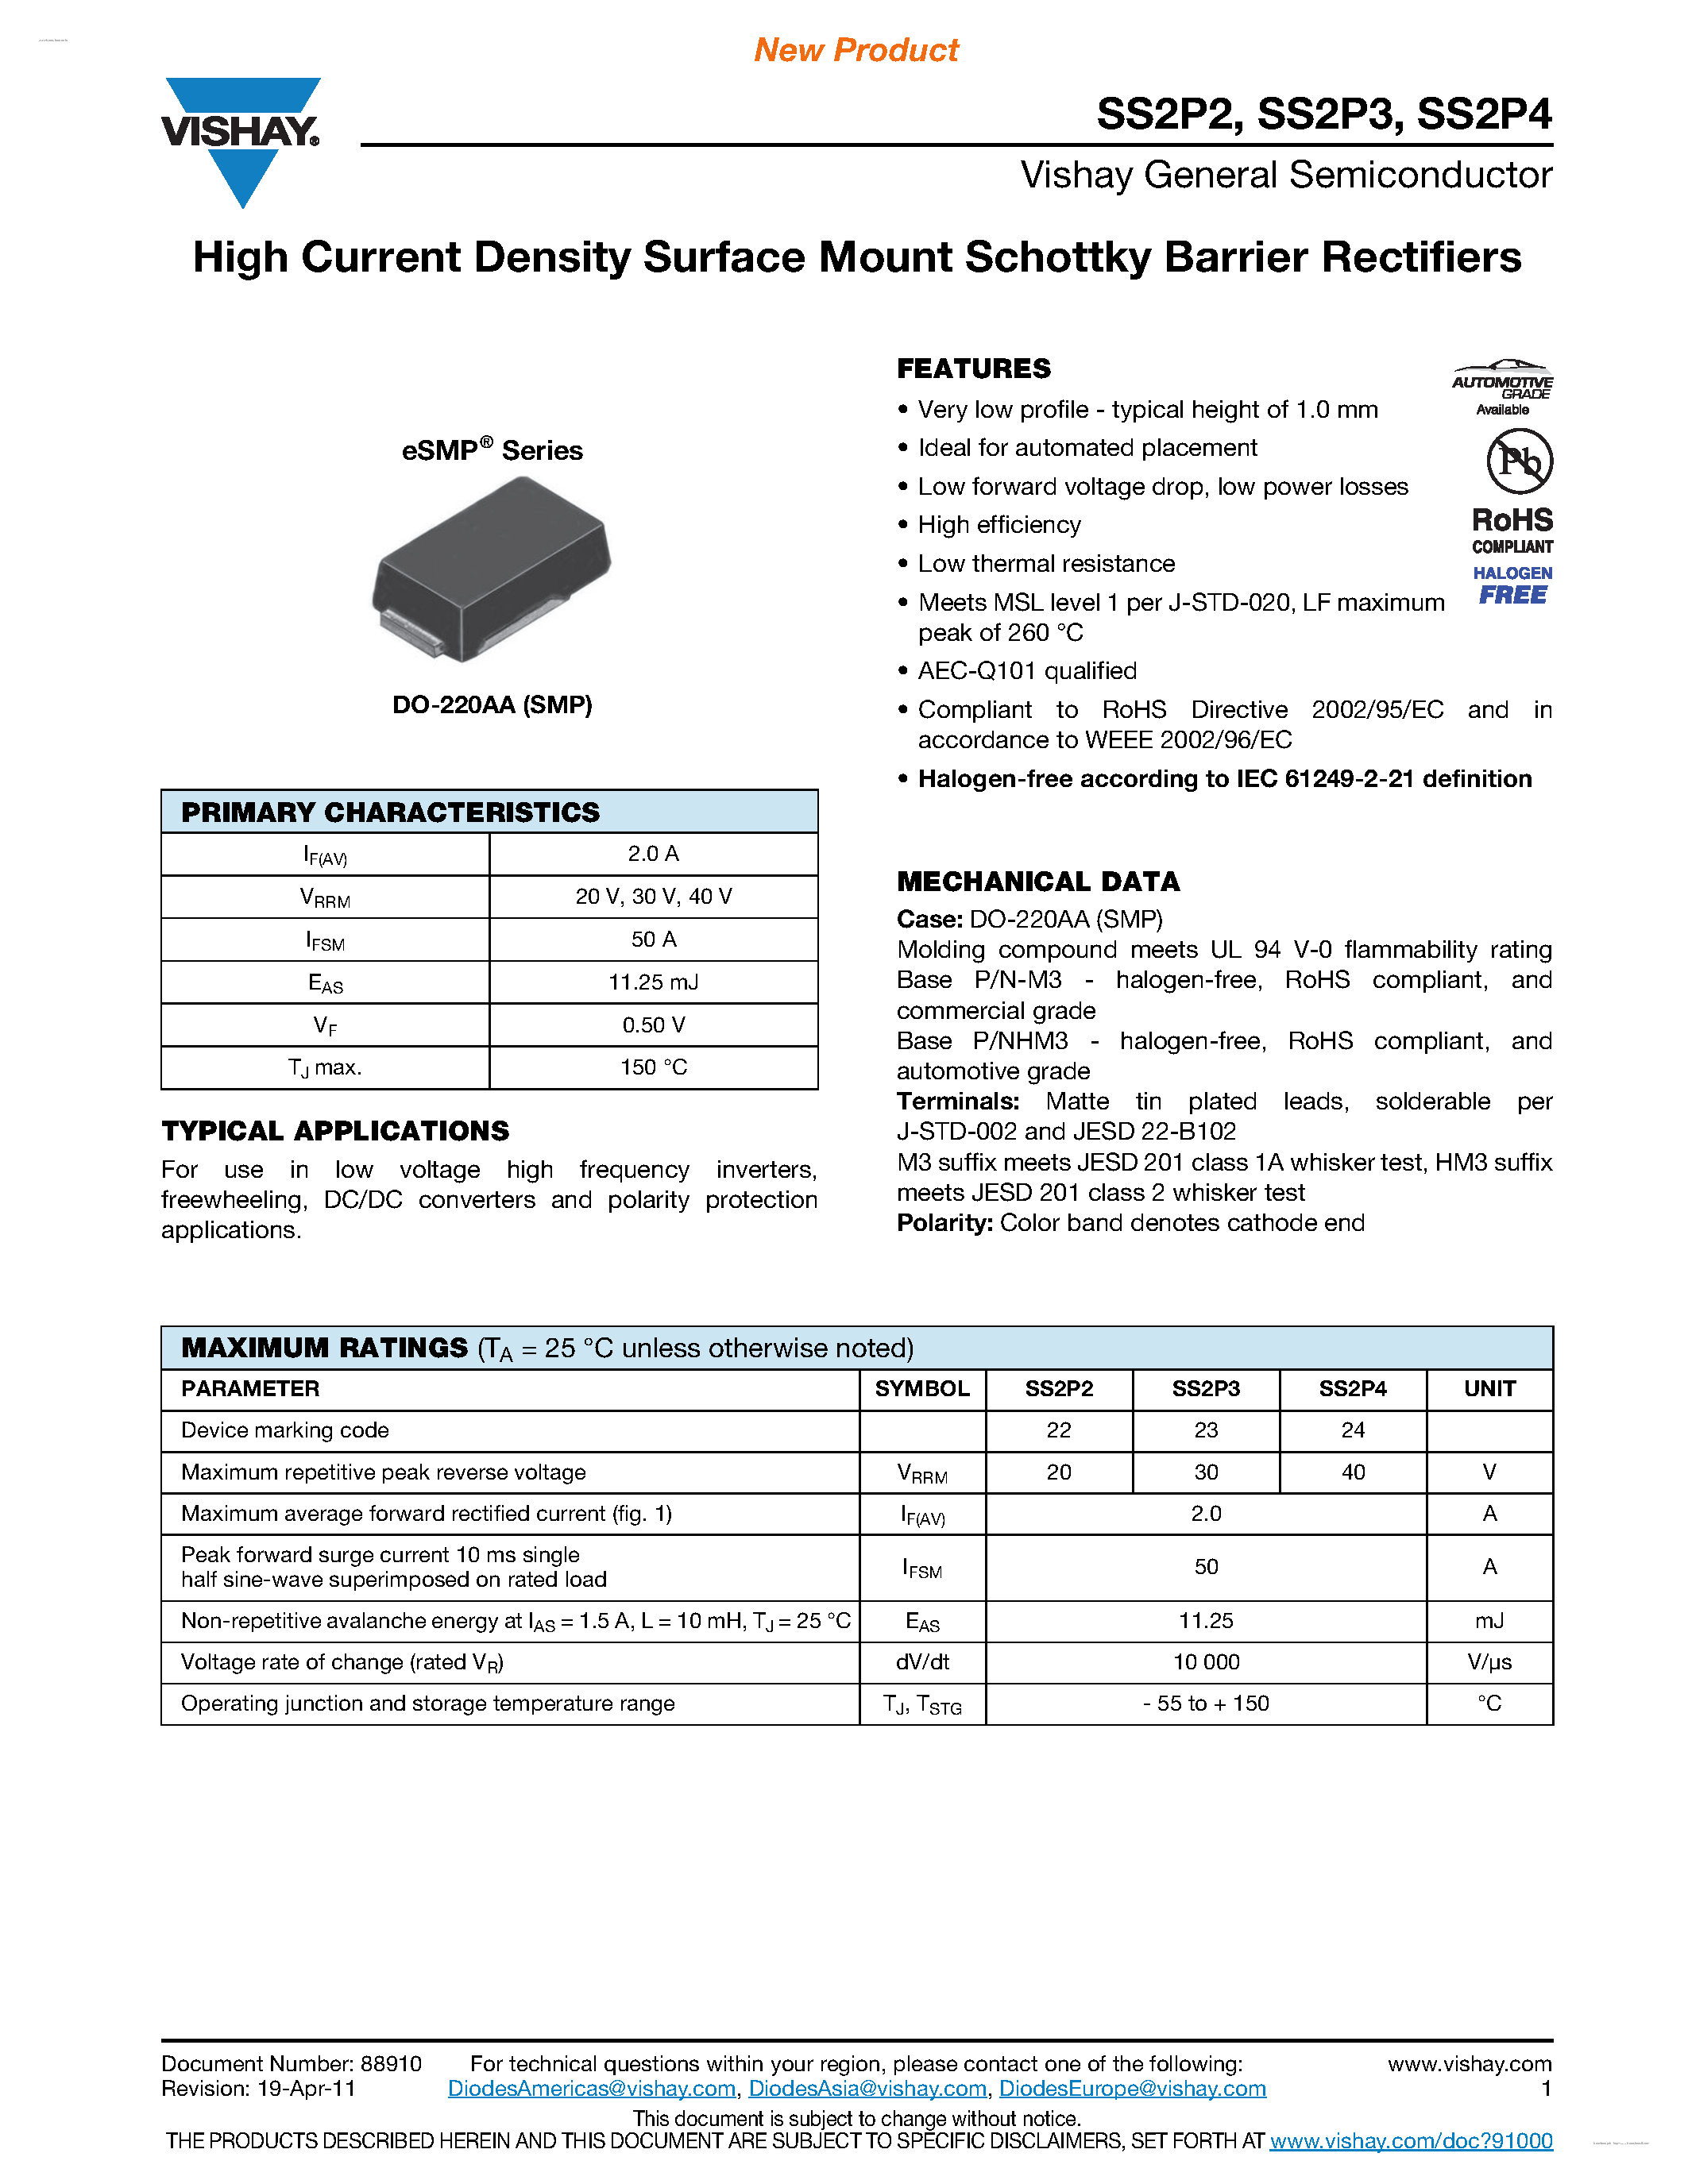 Datasheet SS2P2 - (SS2P2 - SS2P4) High Current Density Surface Mount Schottky Barrier Rectifiers page 1